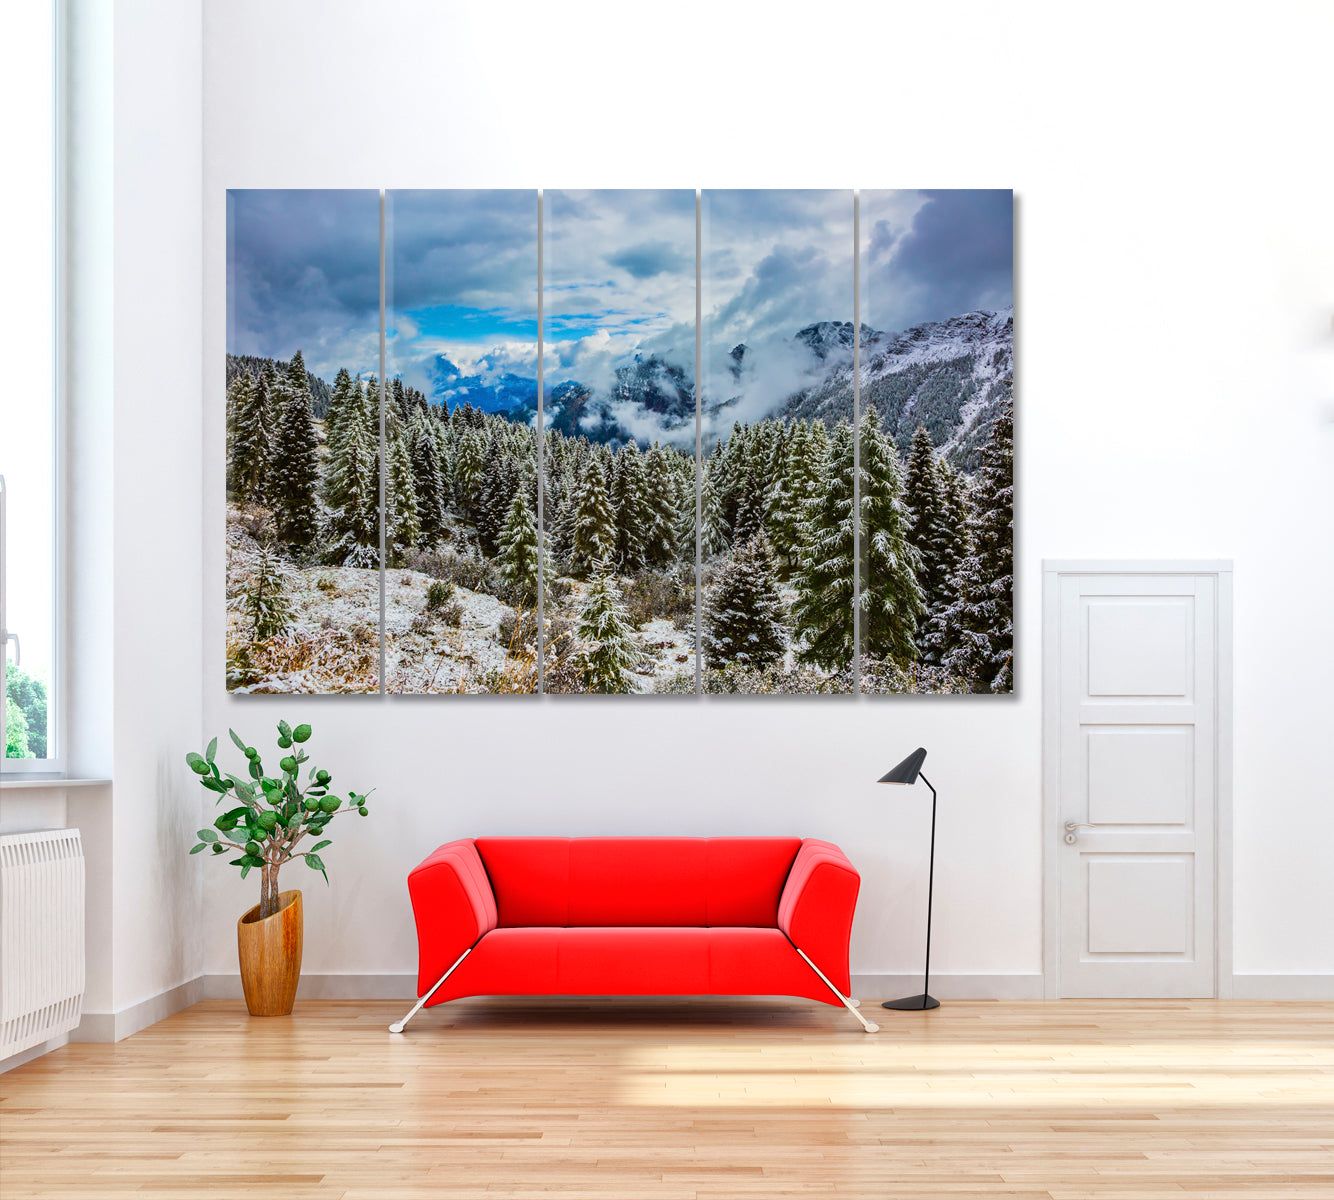 Evergreen Forests in Snowy Alps Canvas Print ArtLexy 5 Panels 36"x24" inches 